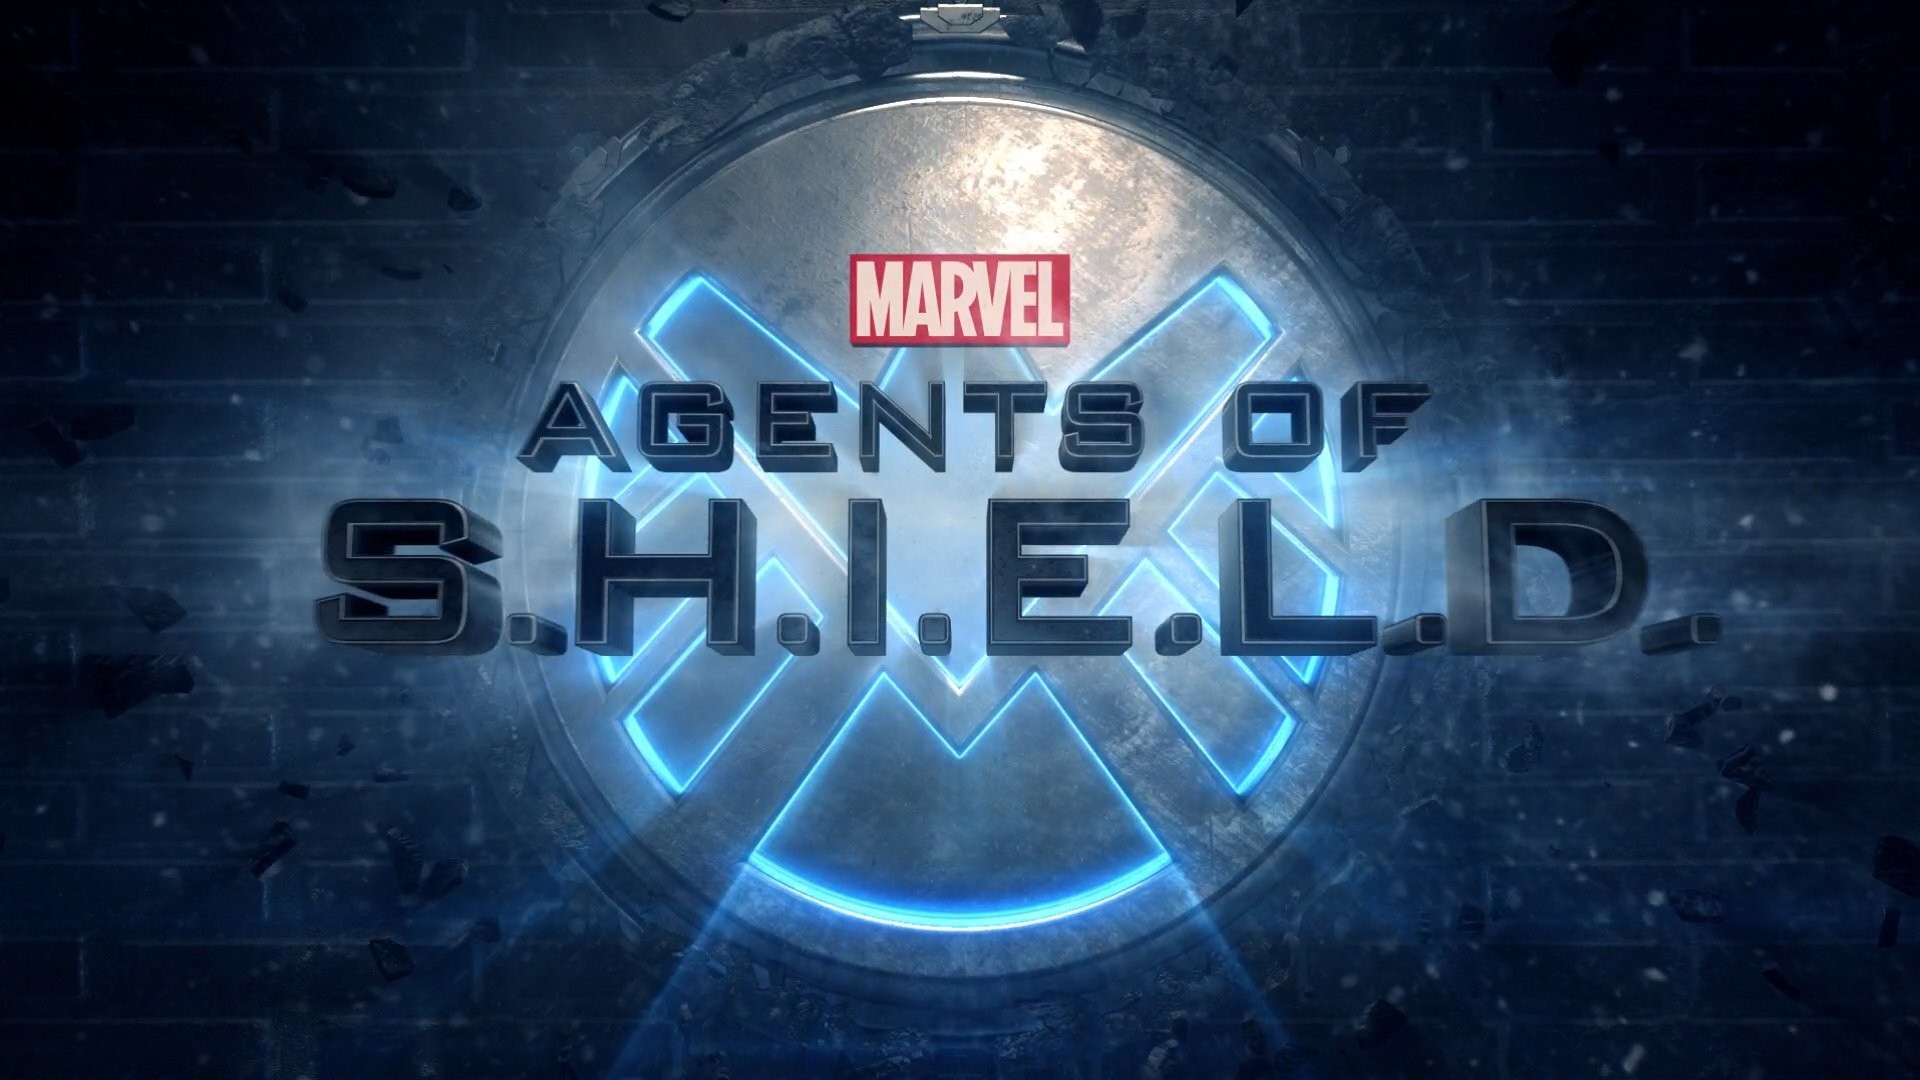 … why agents of shield has the representation that matters …